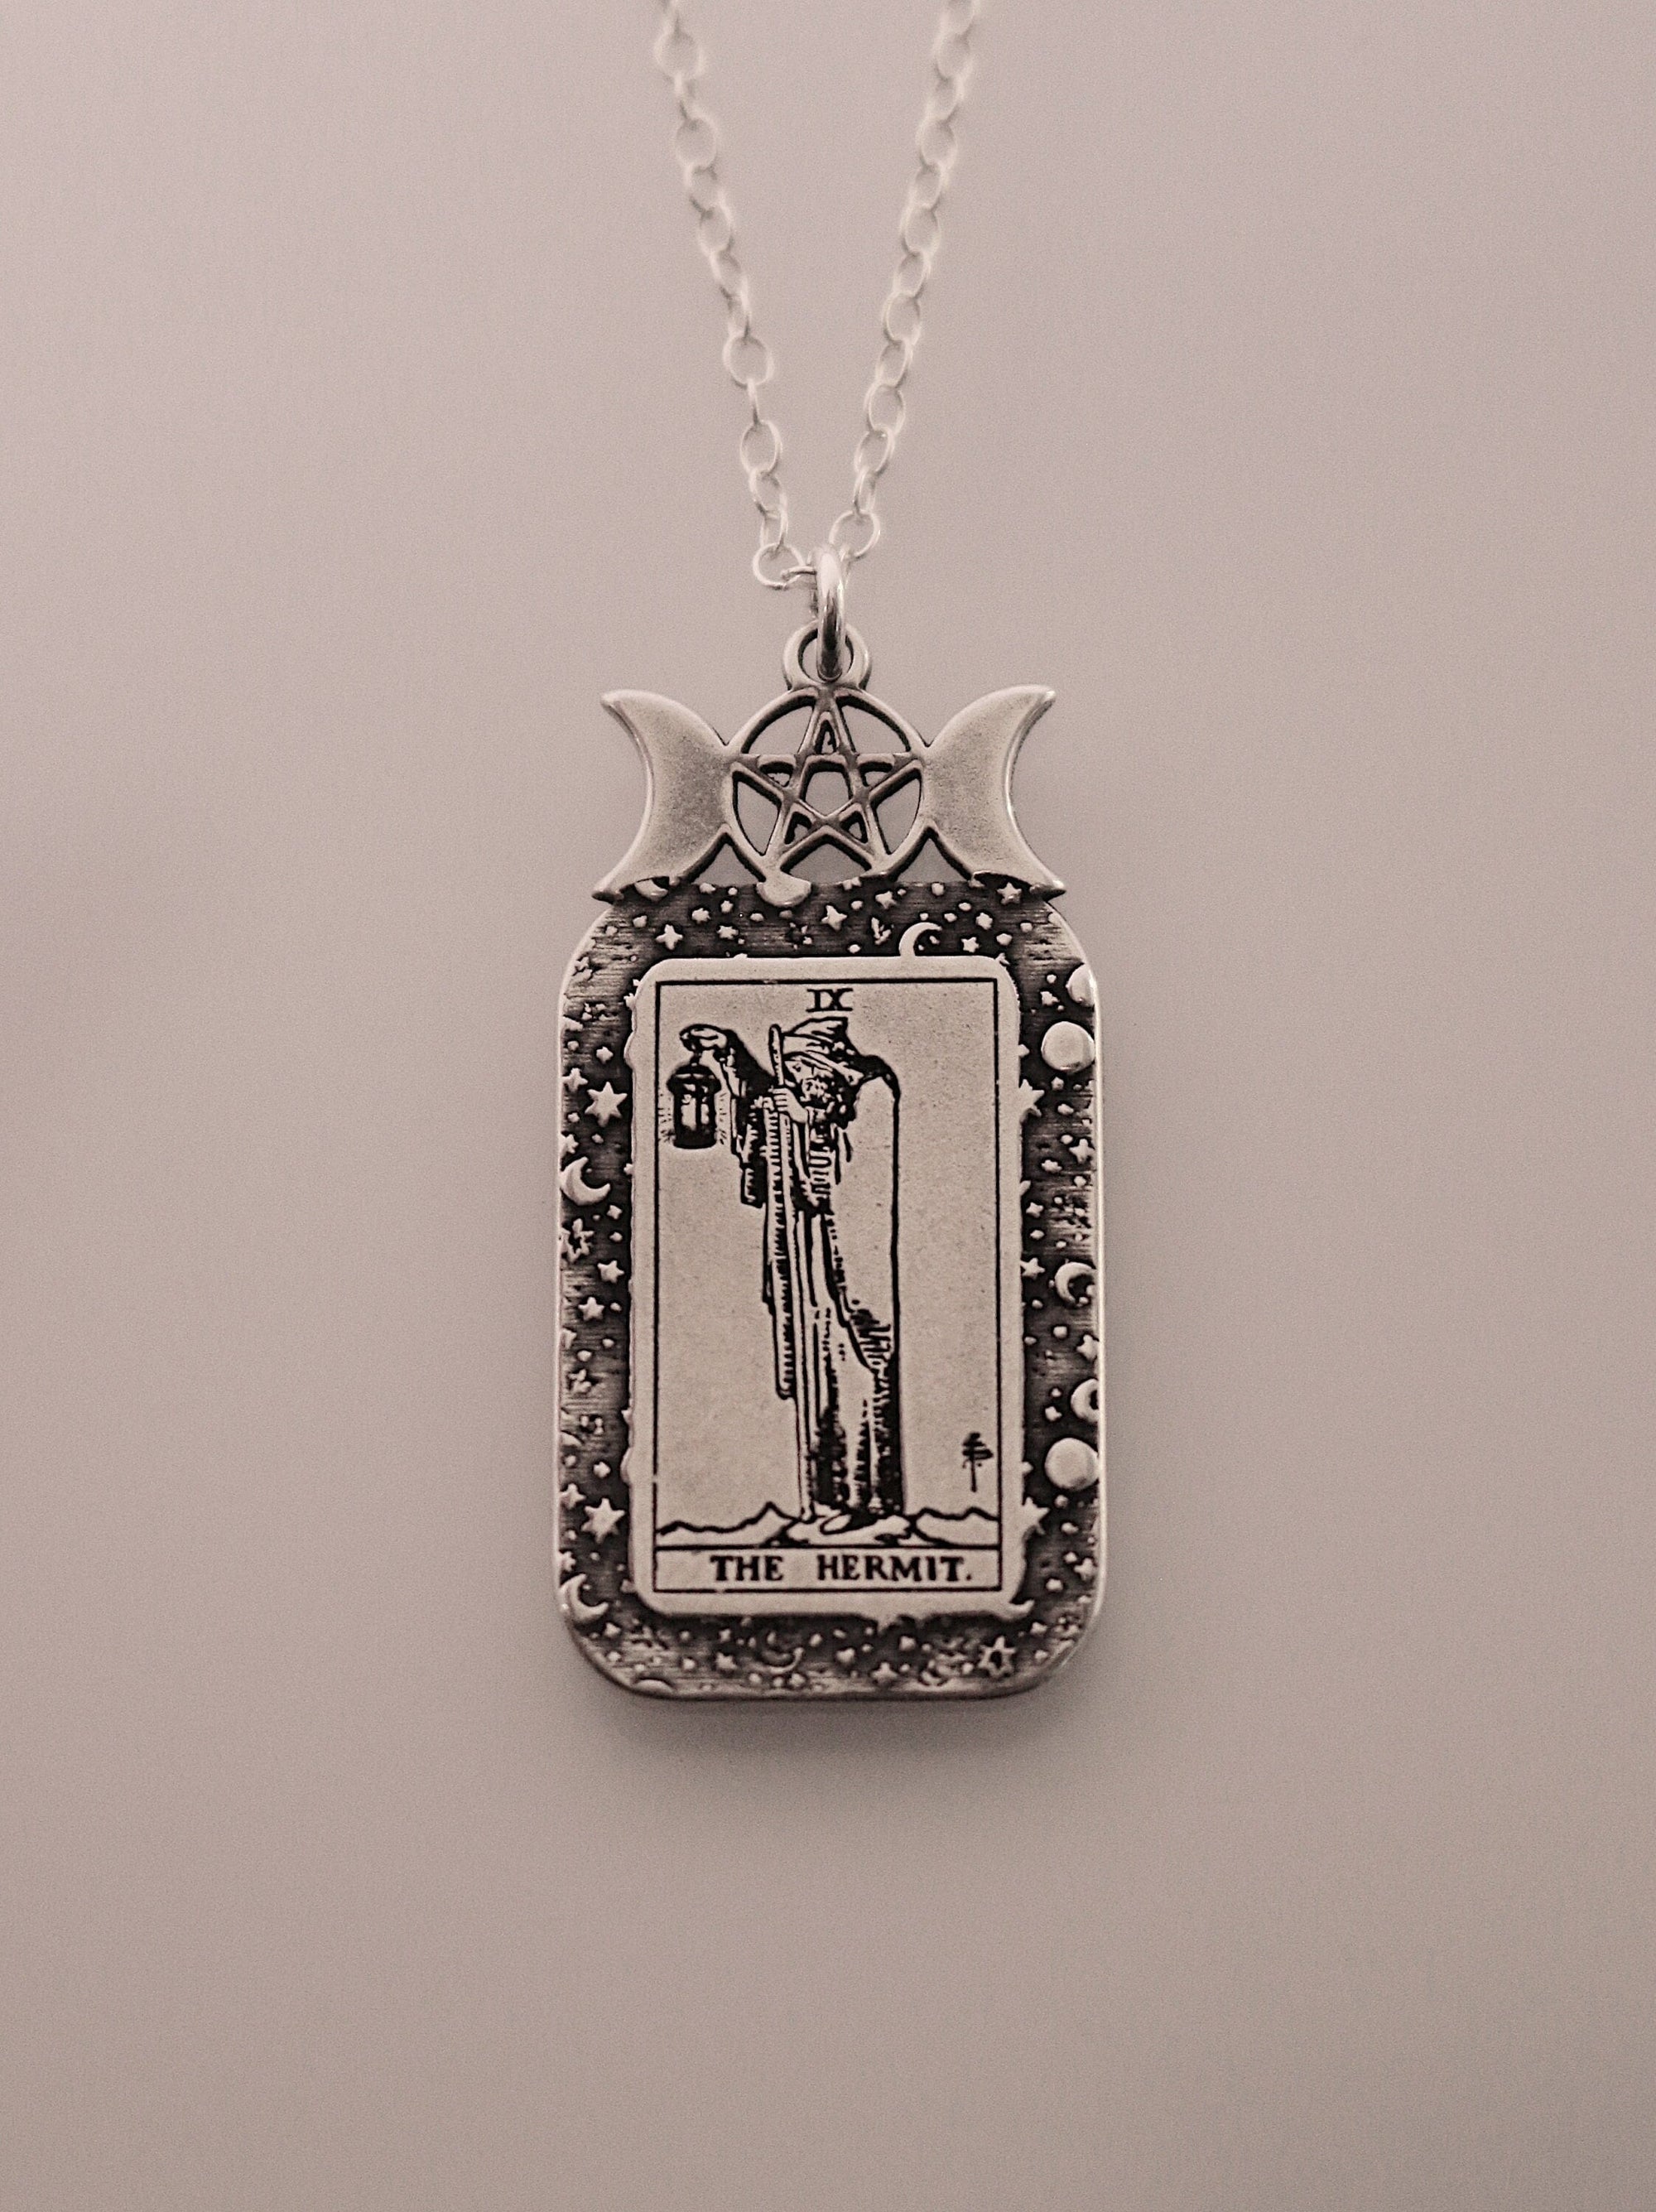 The Hermit Tarot Card Necklace | Best Friend Birthday Gift | Tarot Card Necklace | Celestial Triple Moon Goddess Jewelry | Witch Necklace